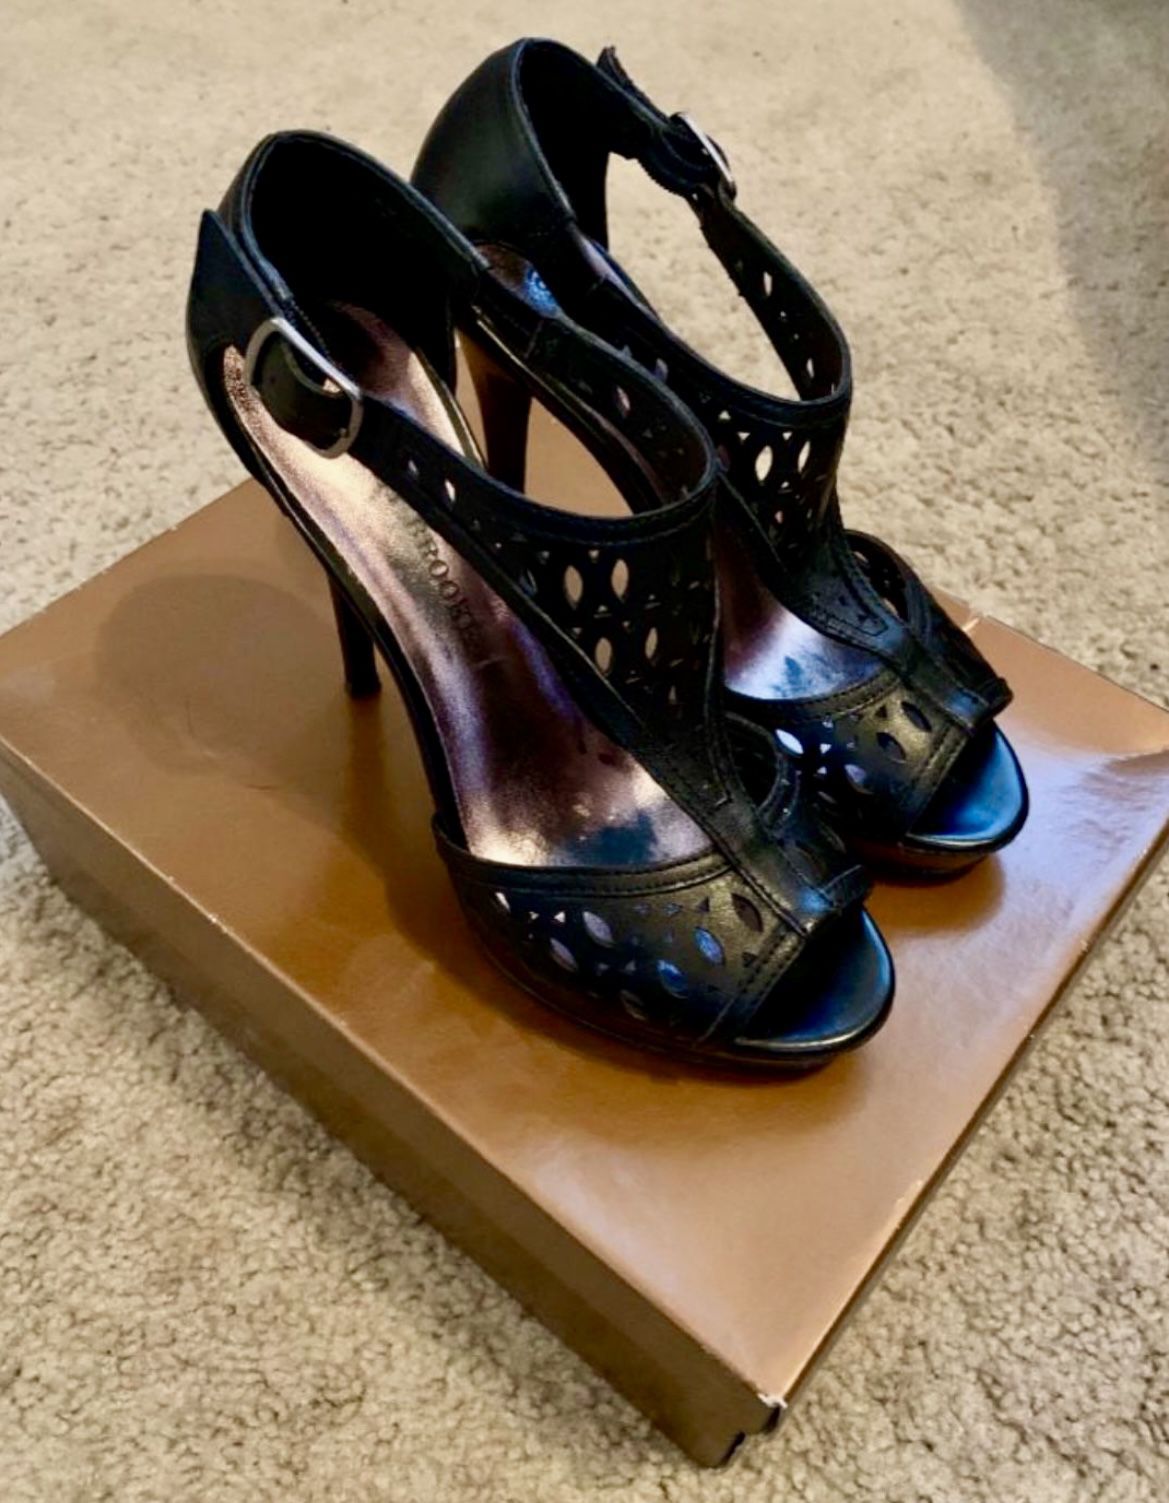 Audrey Brooke Kourtney Black High Heel Shoes in size 6.5 in great condition. Price is firm